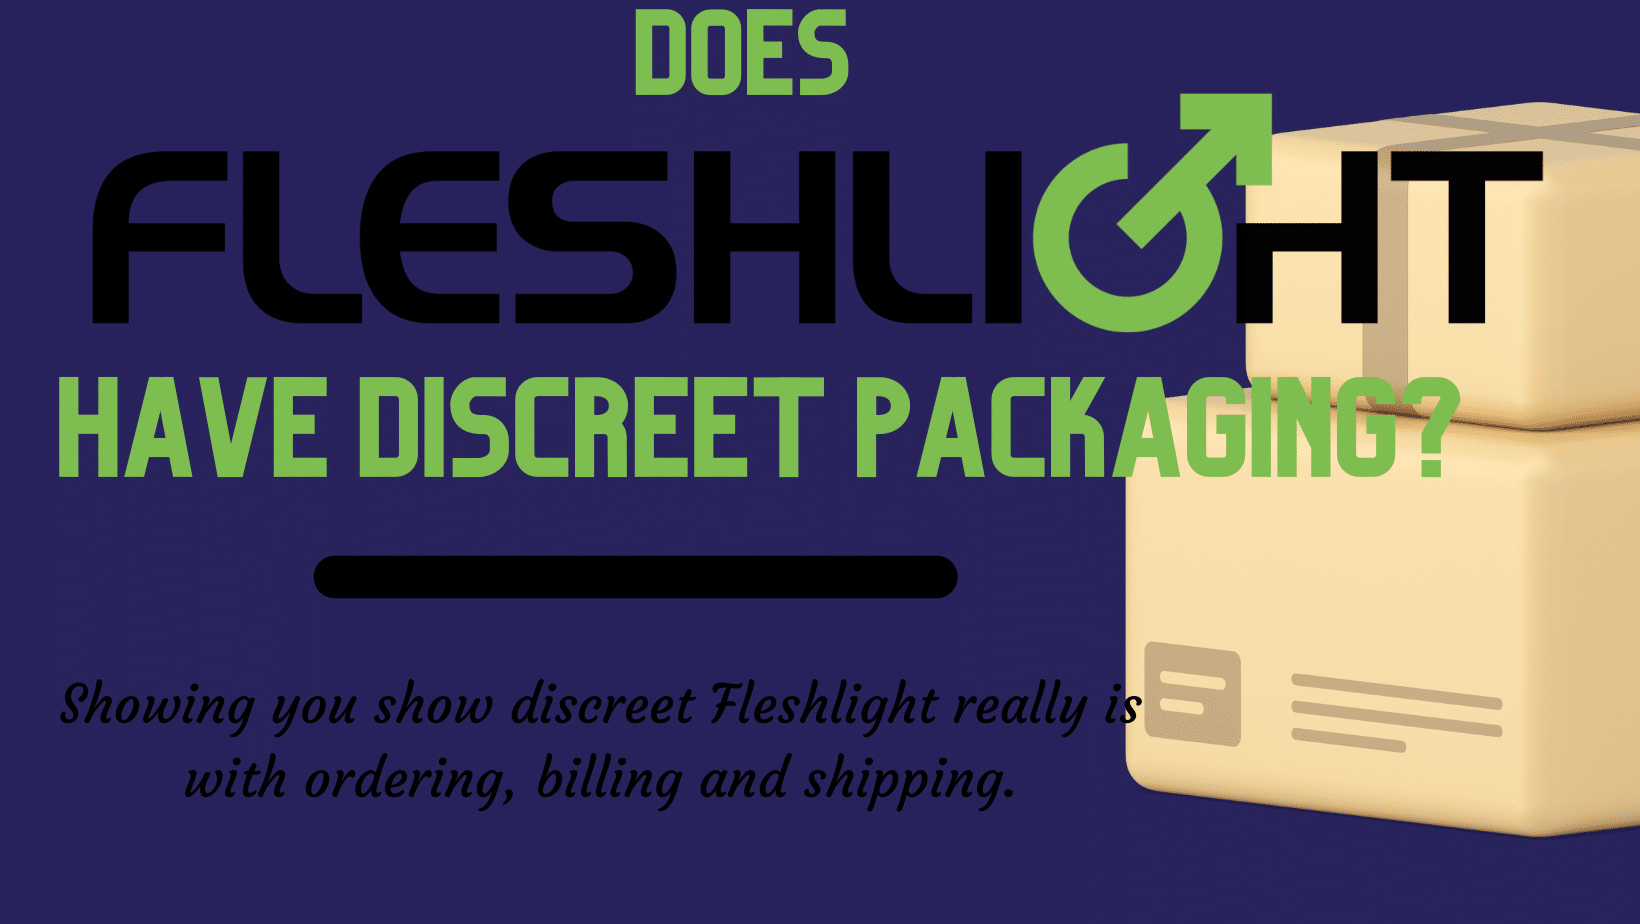 Does Fleshlight Have Discreet Packaging?